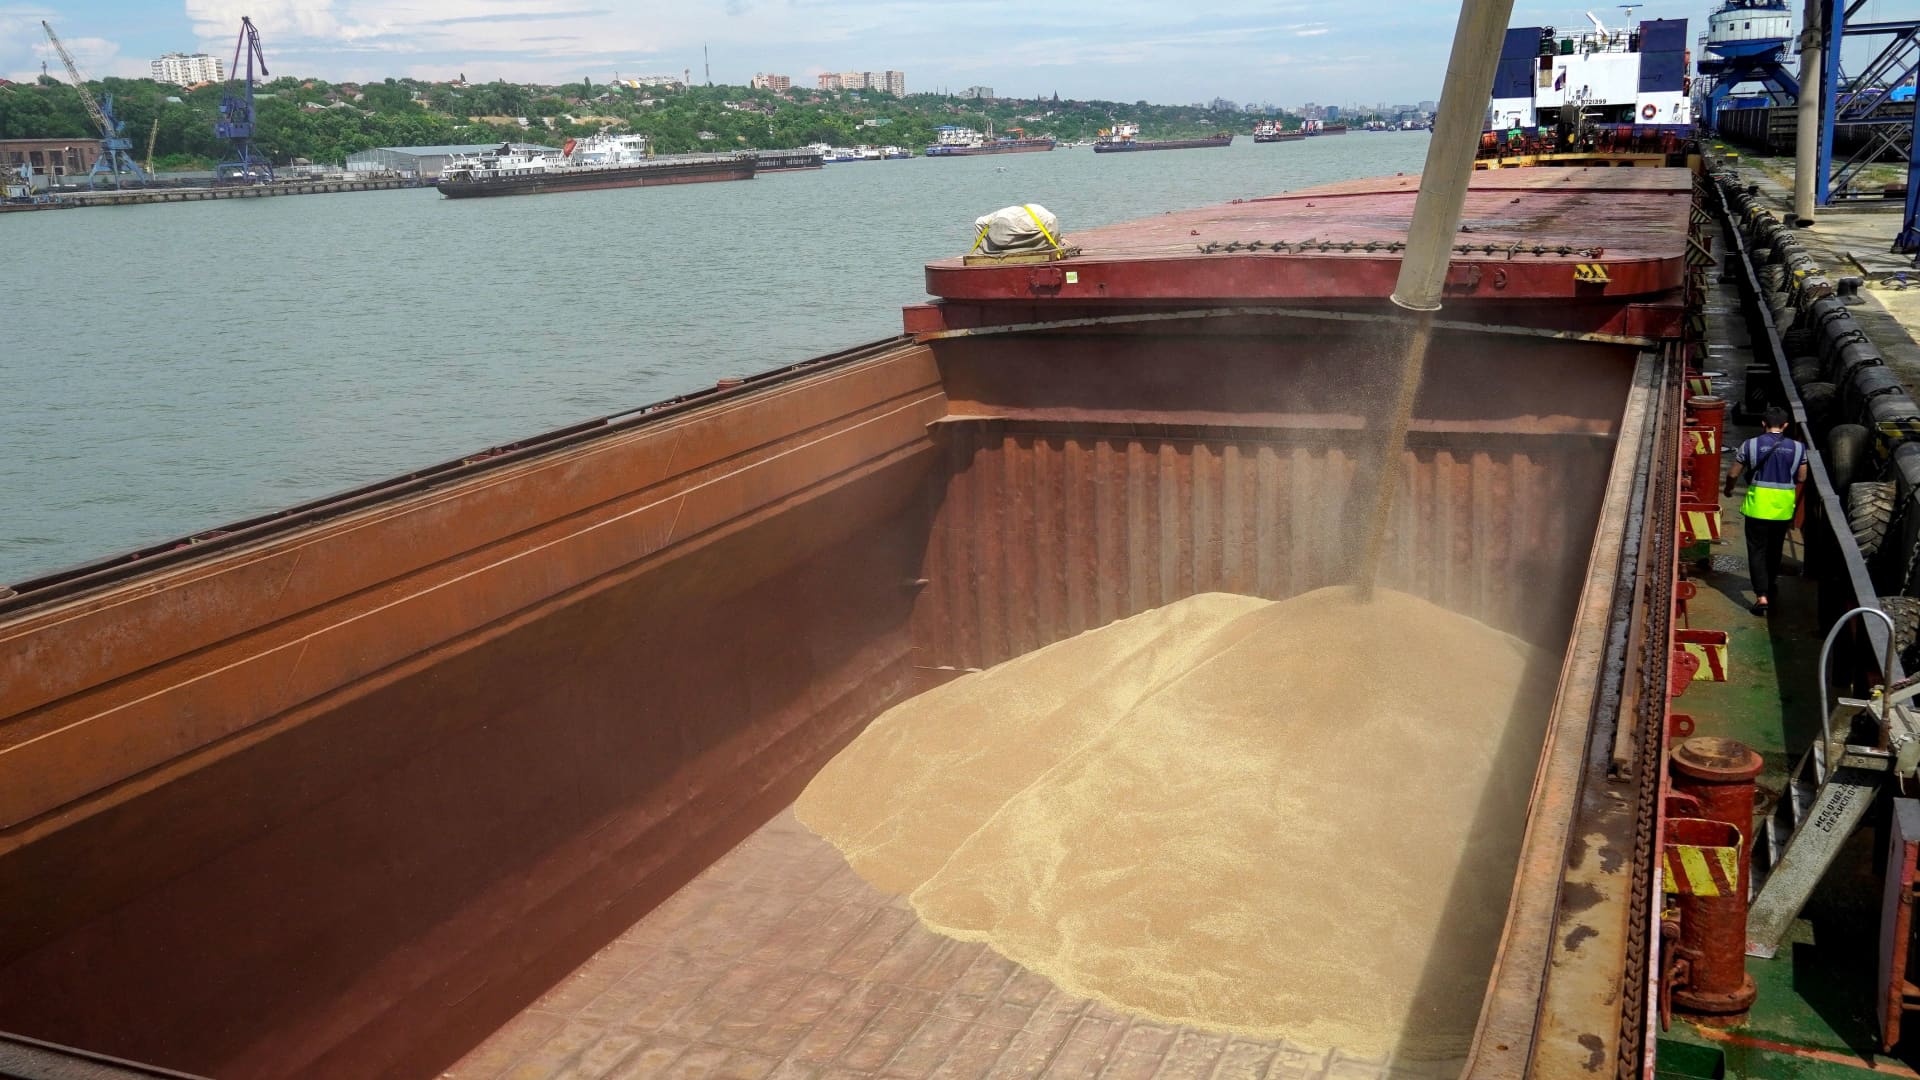 Wheat is loaded aboard a cargo ship in the international port of Rostov-on-Don to be shipped to Turkey, on July 26, 2022.